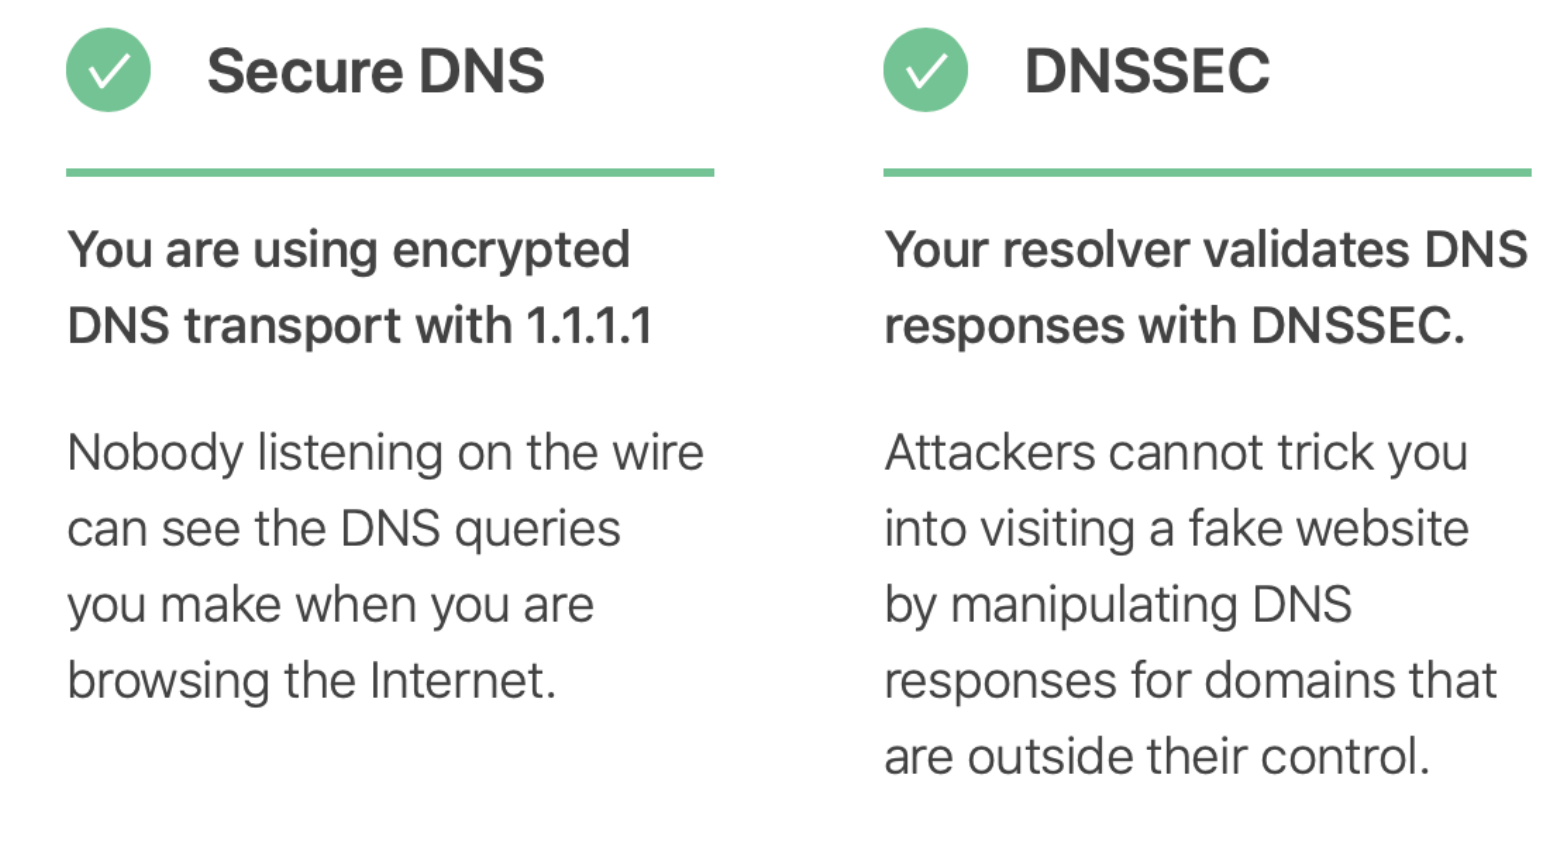 DNS Over HTTPS Increases User Privacy And Security By Preventing Eavesdropping And Manipulation